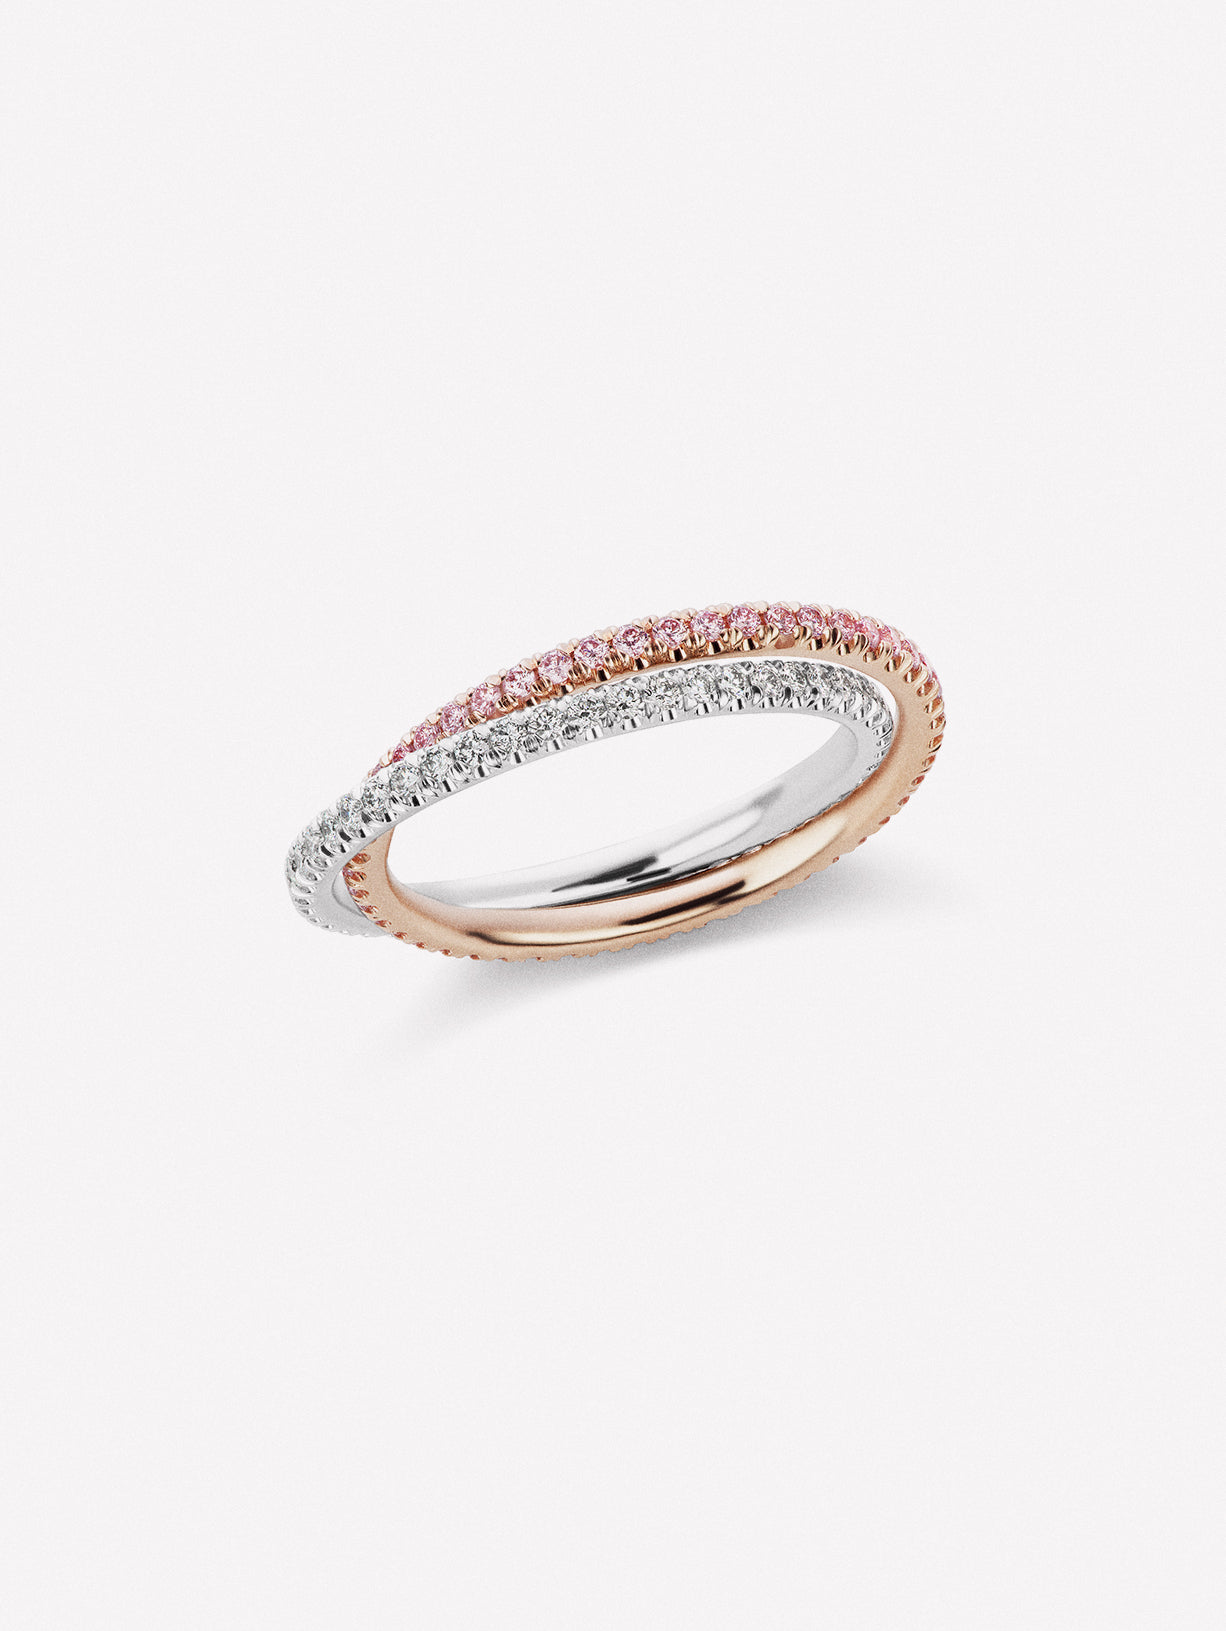 PInk diamond and white diamond bands intertwined, and can move independently of each other. 